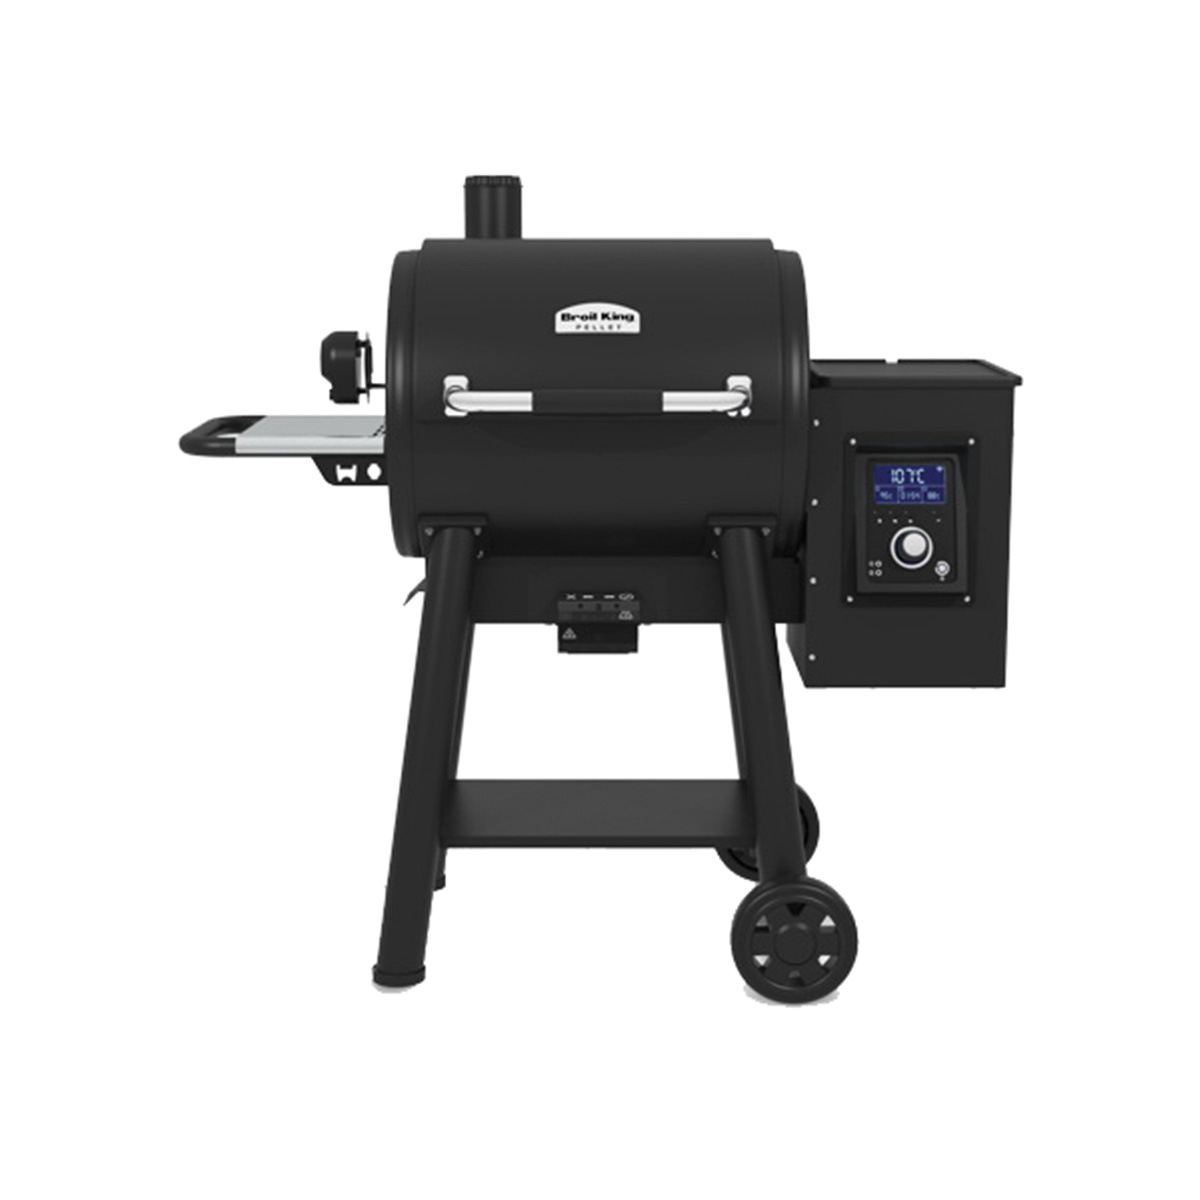 Broil King Regal Pellet 400 Series 495051 Pellet Grill, 500 sq-in Primary Cooking Surface, Smoker Included: Yes, Black - 1